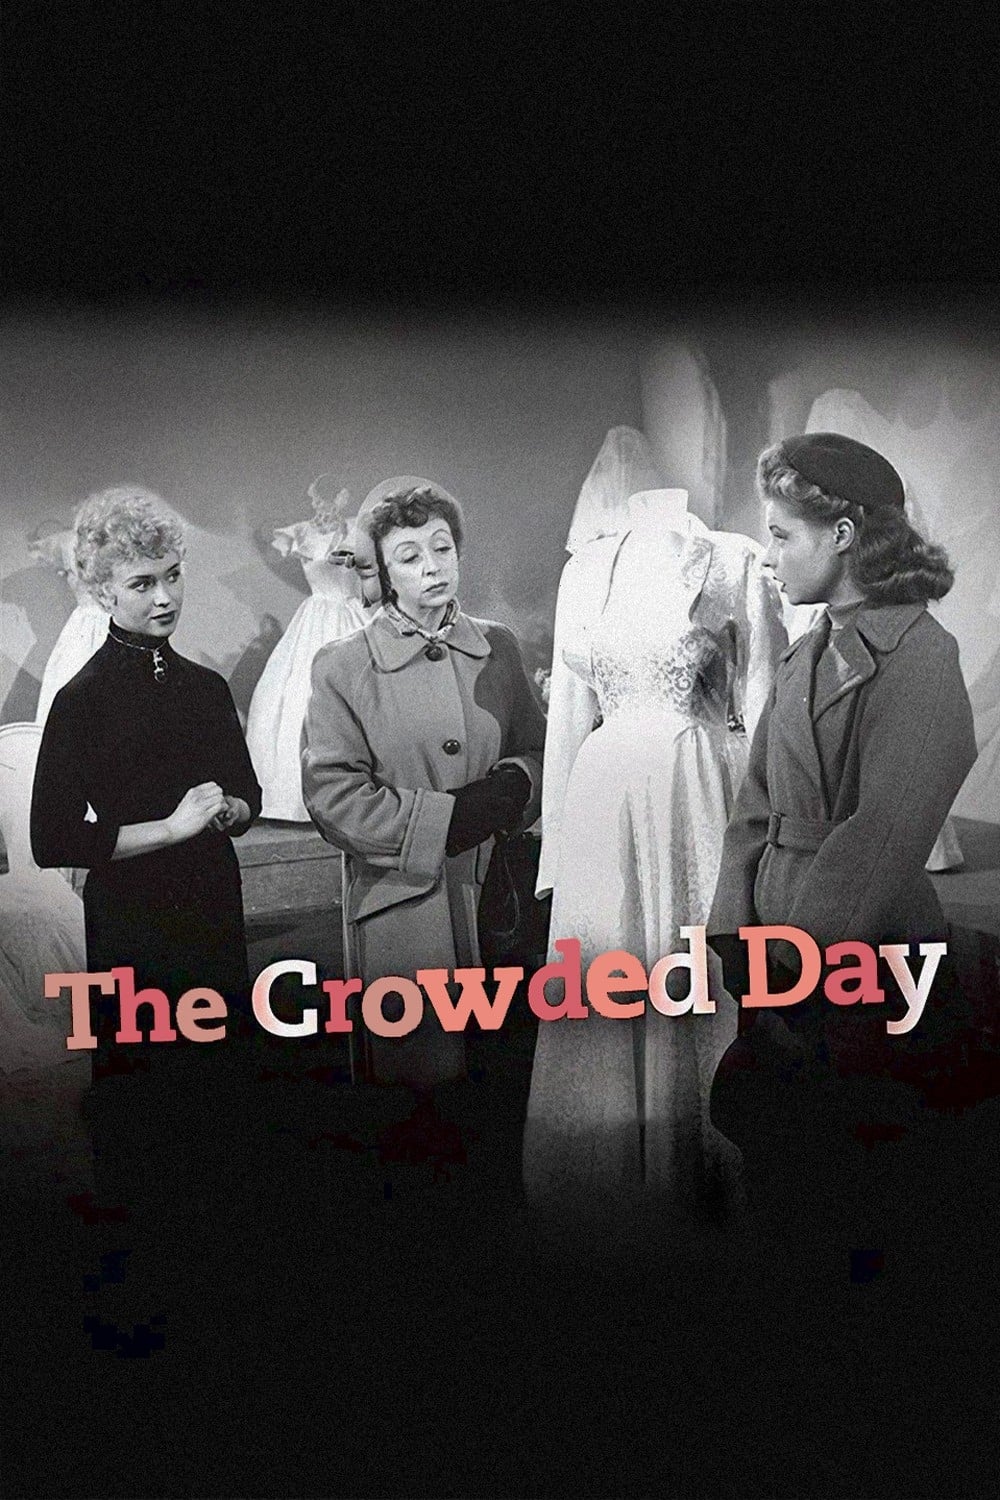 The Crowded Day (1954)